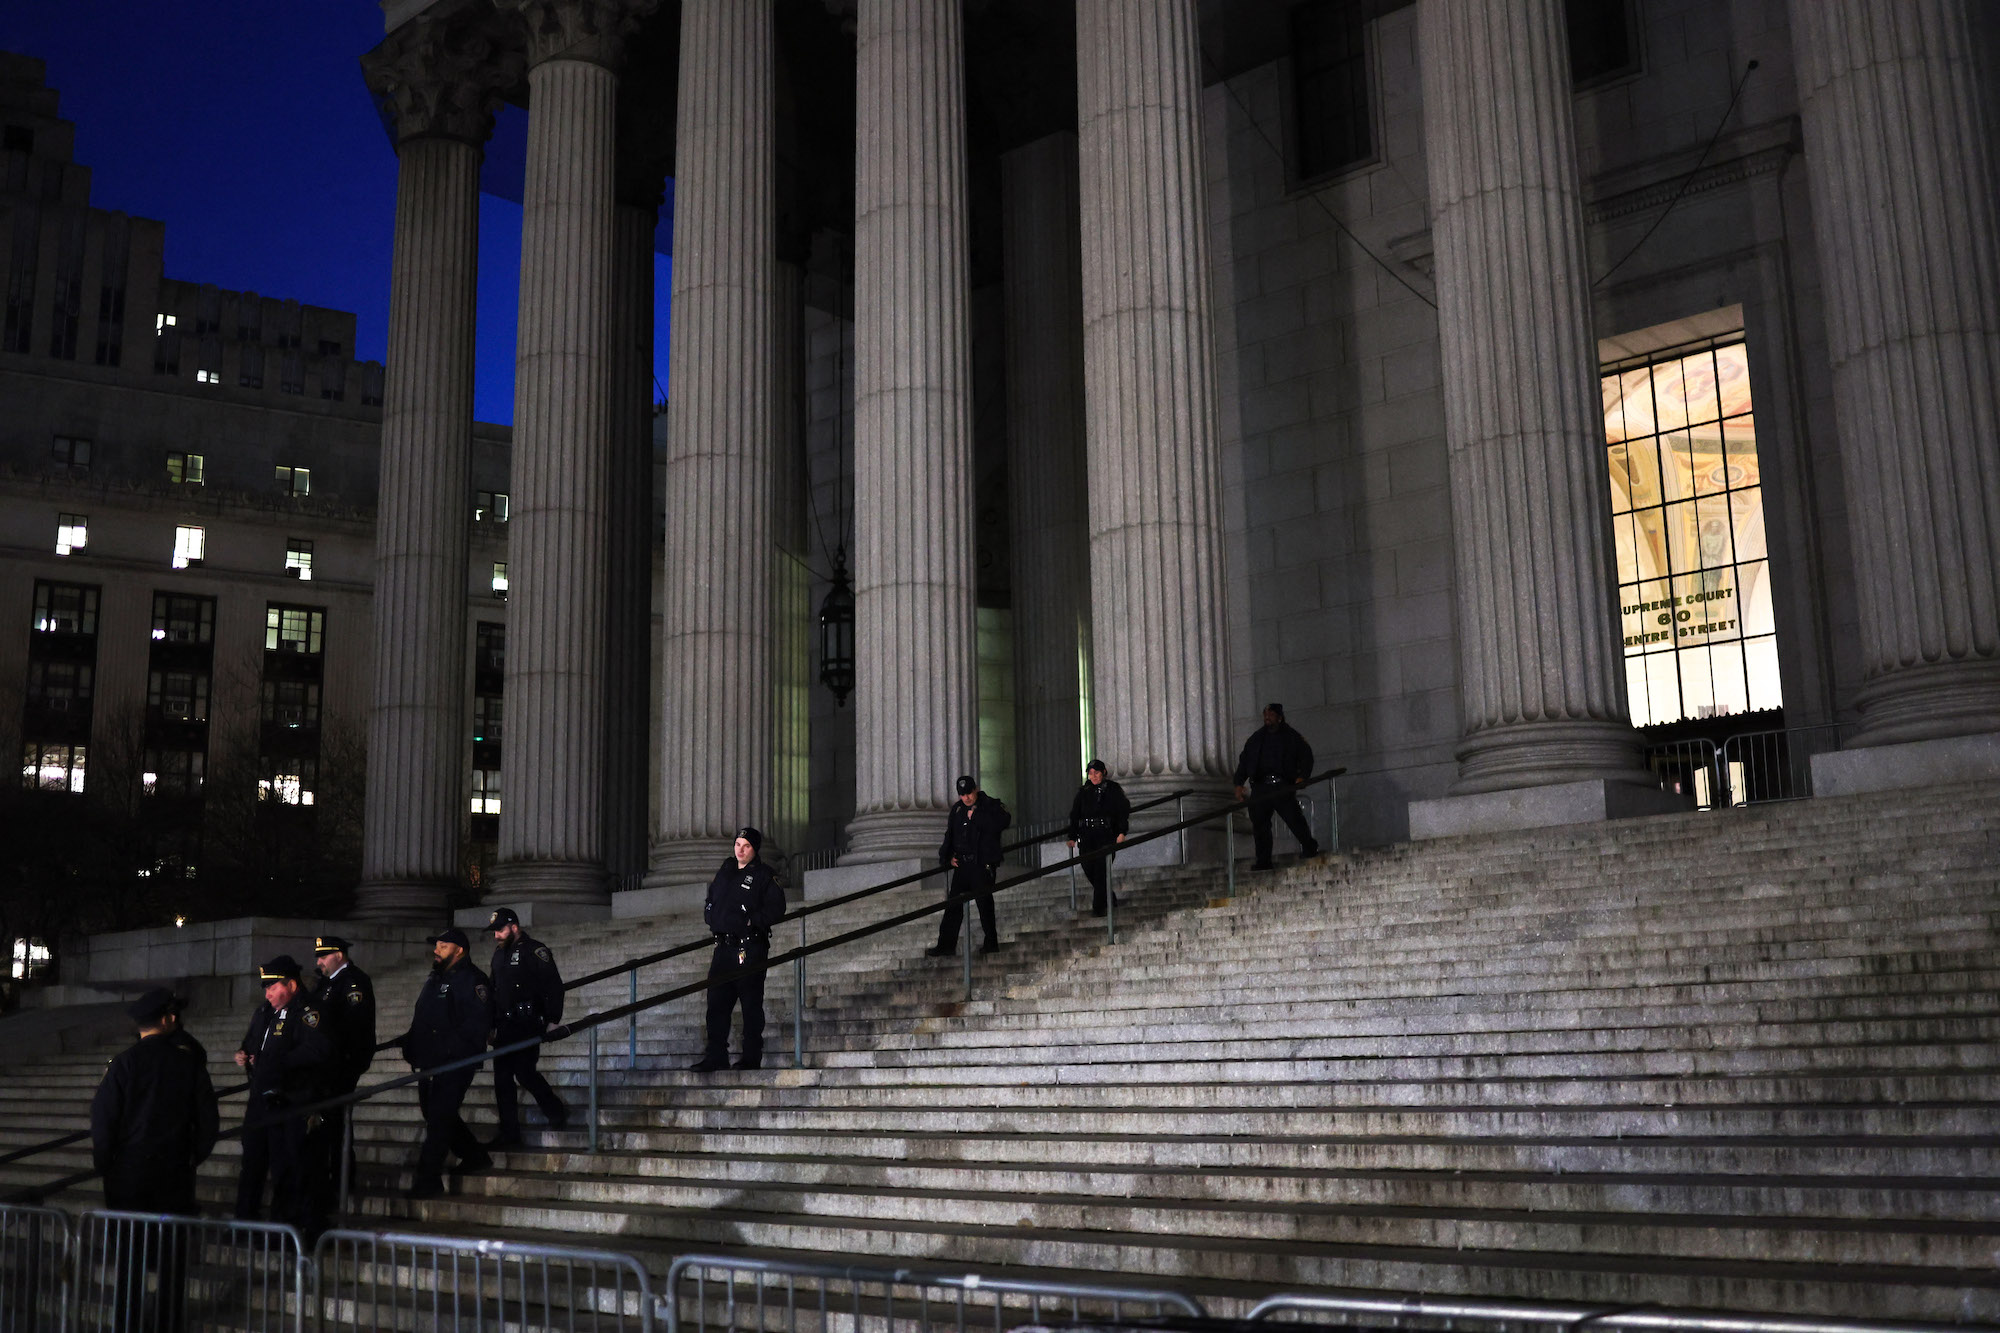 The New York State Supreme Court is seen in New York City on Thursday morning.